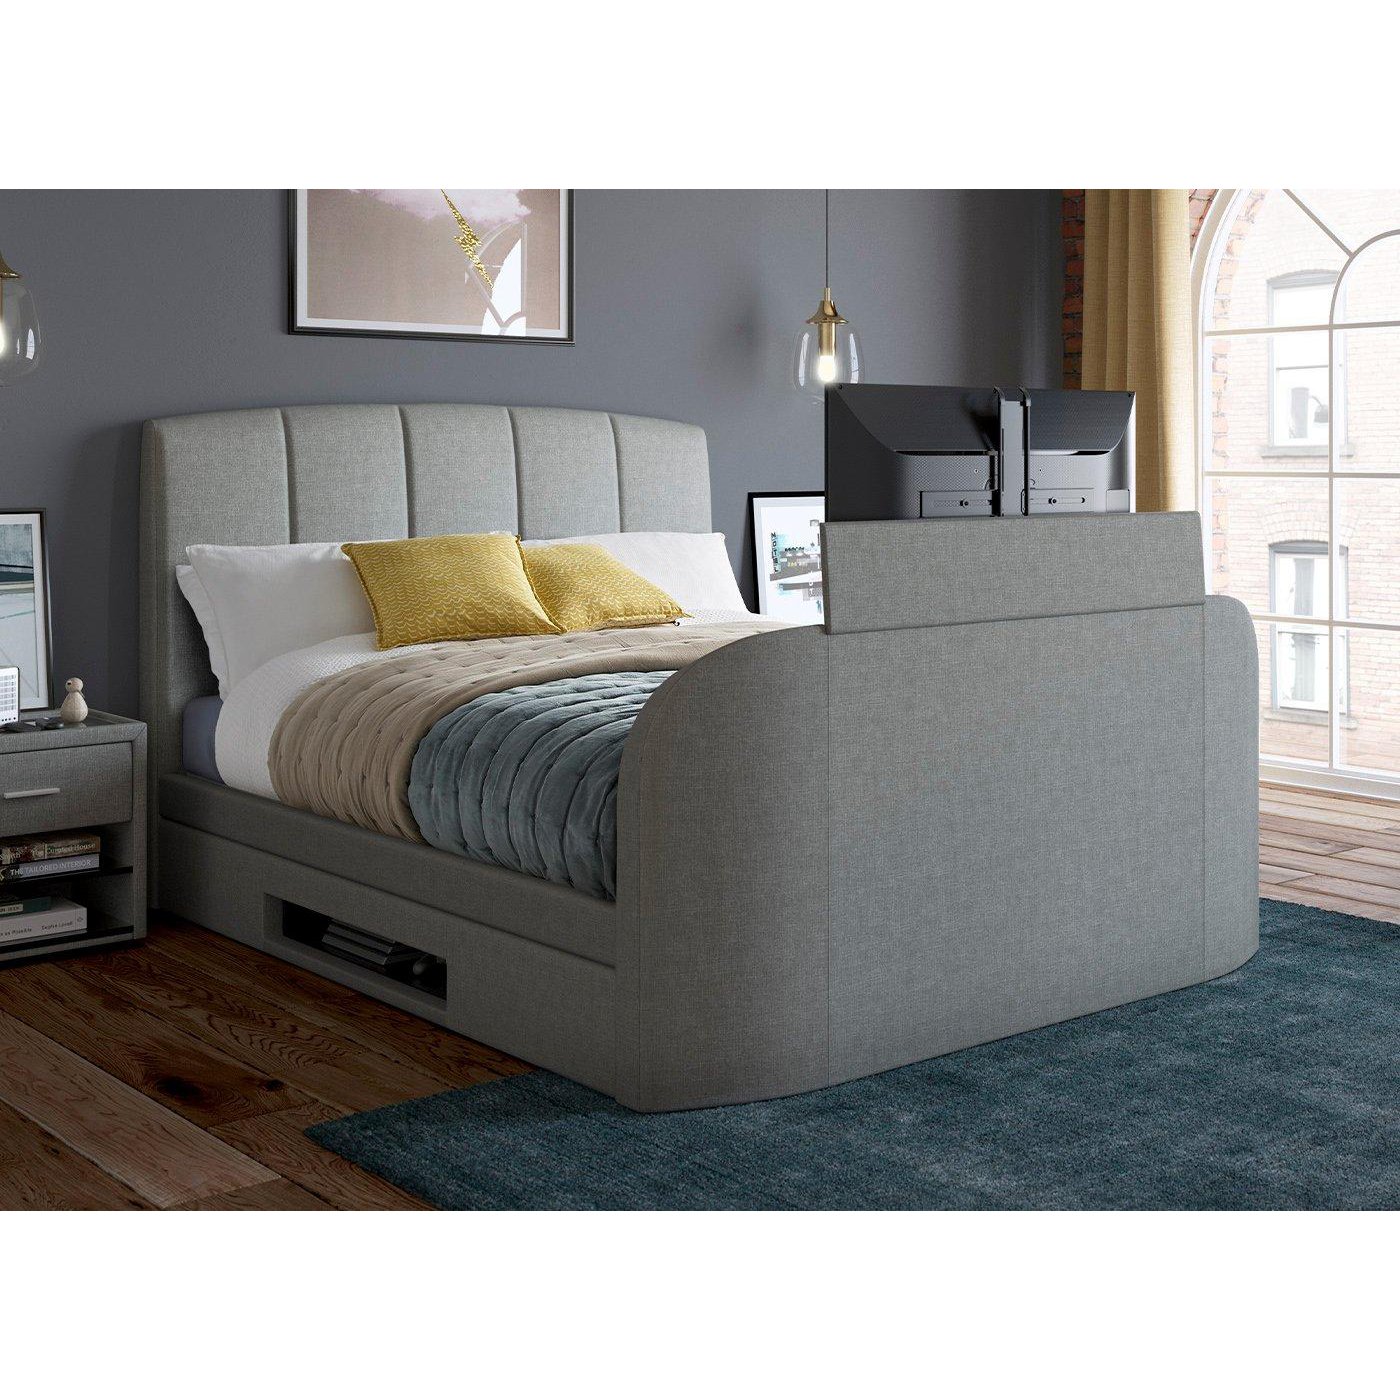 Seoul Upholstered TV Bed Frame - 4'6 Double - Grey